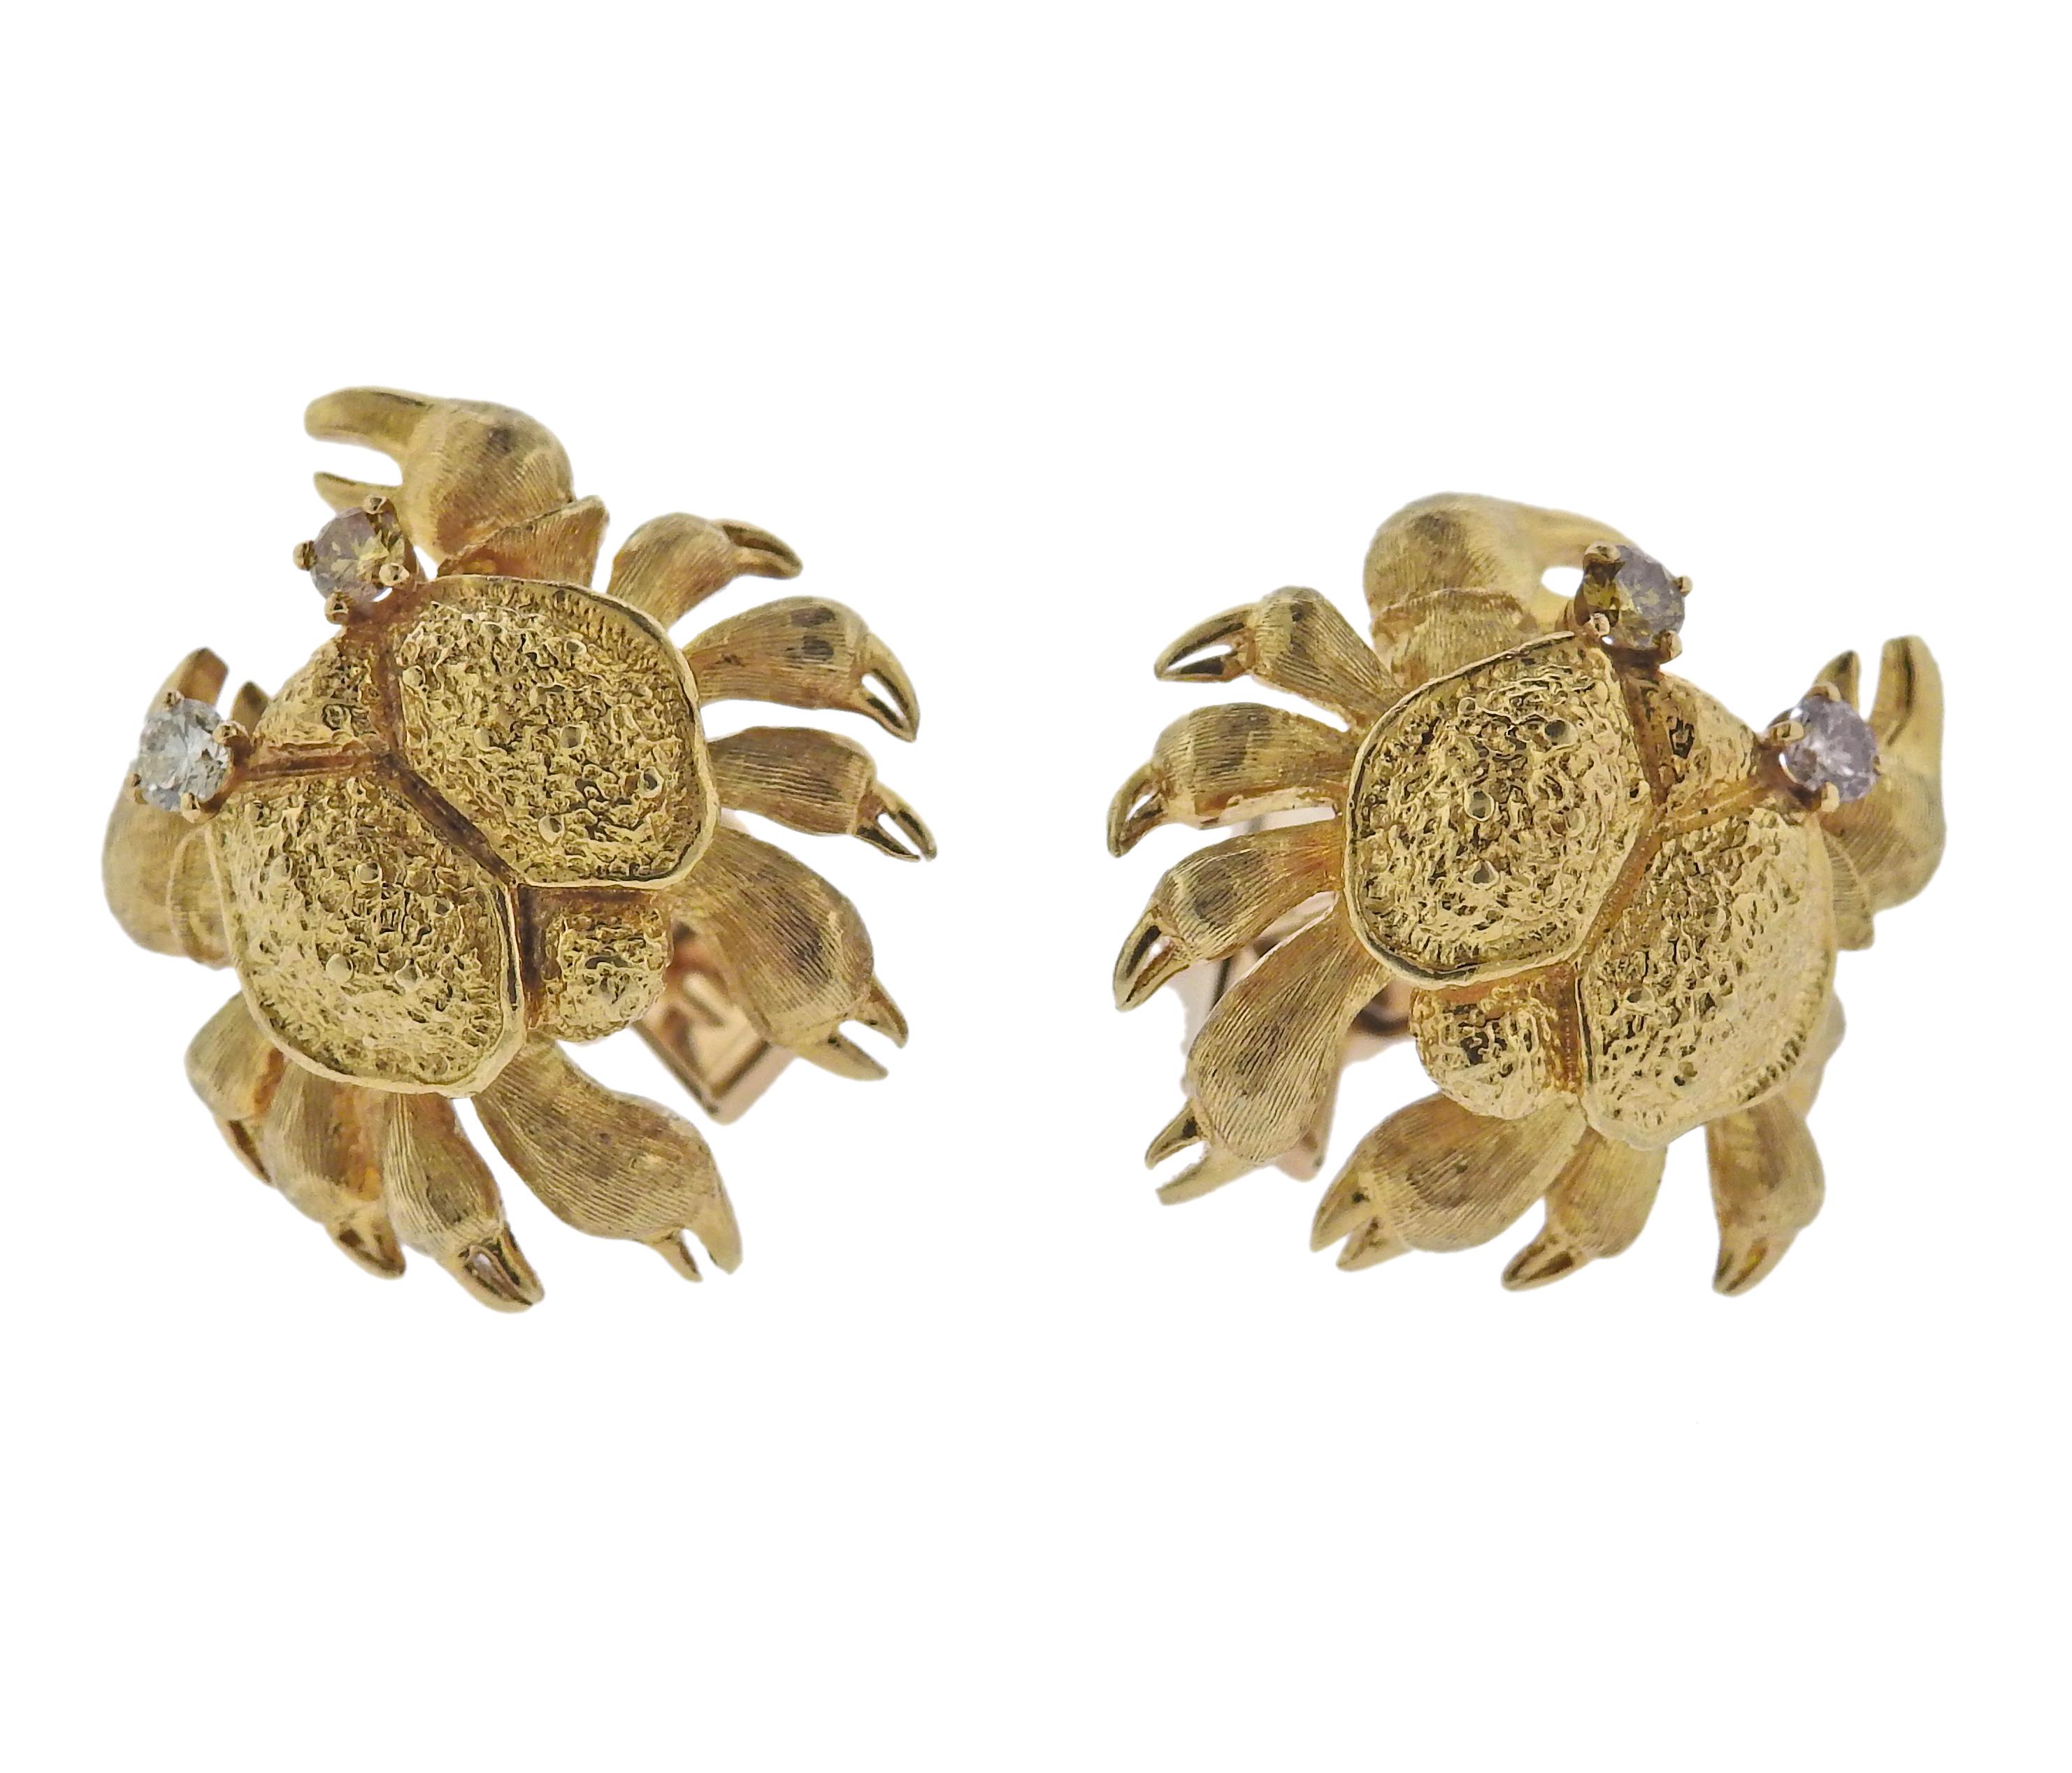 Pair of 18k gold Cancer zodiac cufflinks, with diamond eyes - approx. 0.26ctw VS/H. Cufflinks are 23 x 21mm. Weight - 23.3 grams. 